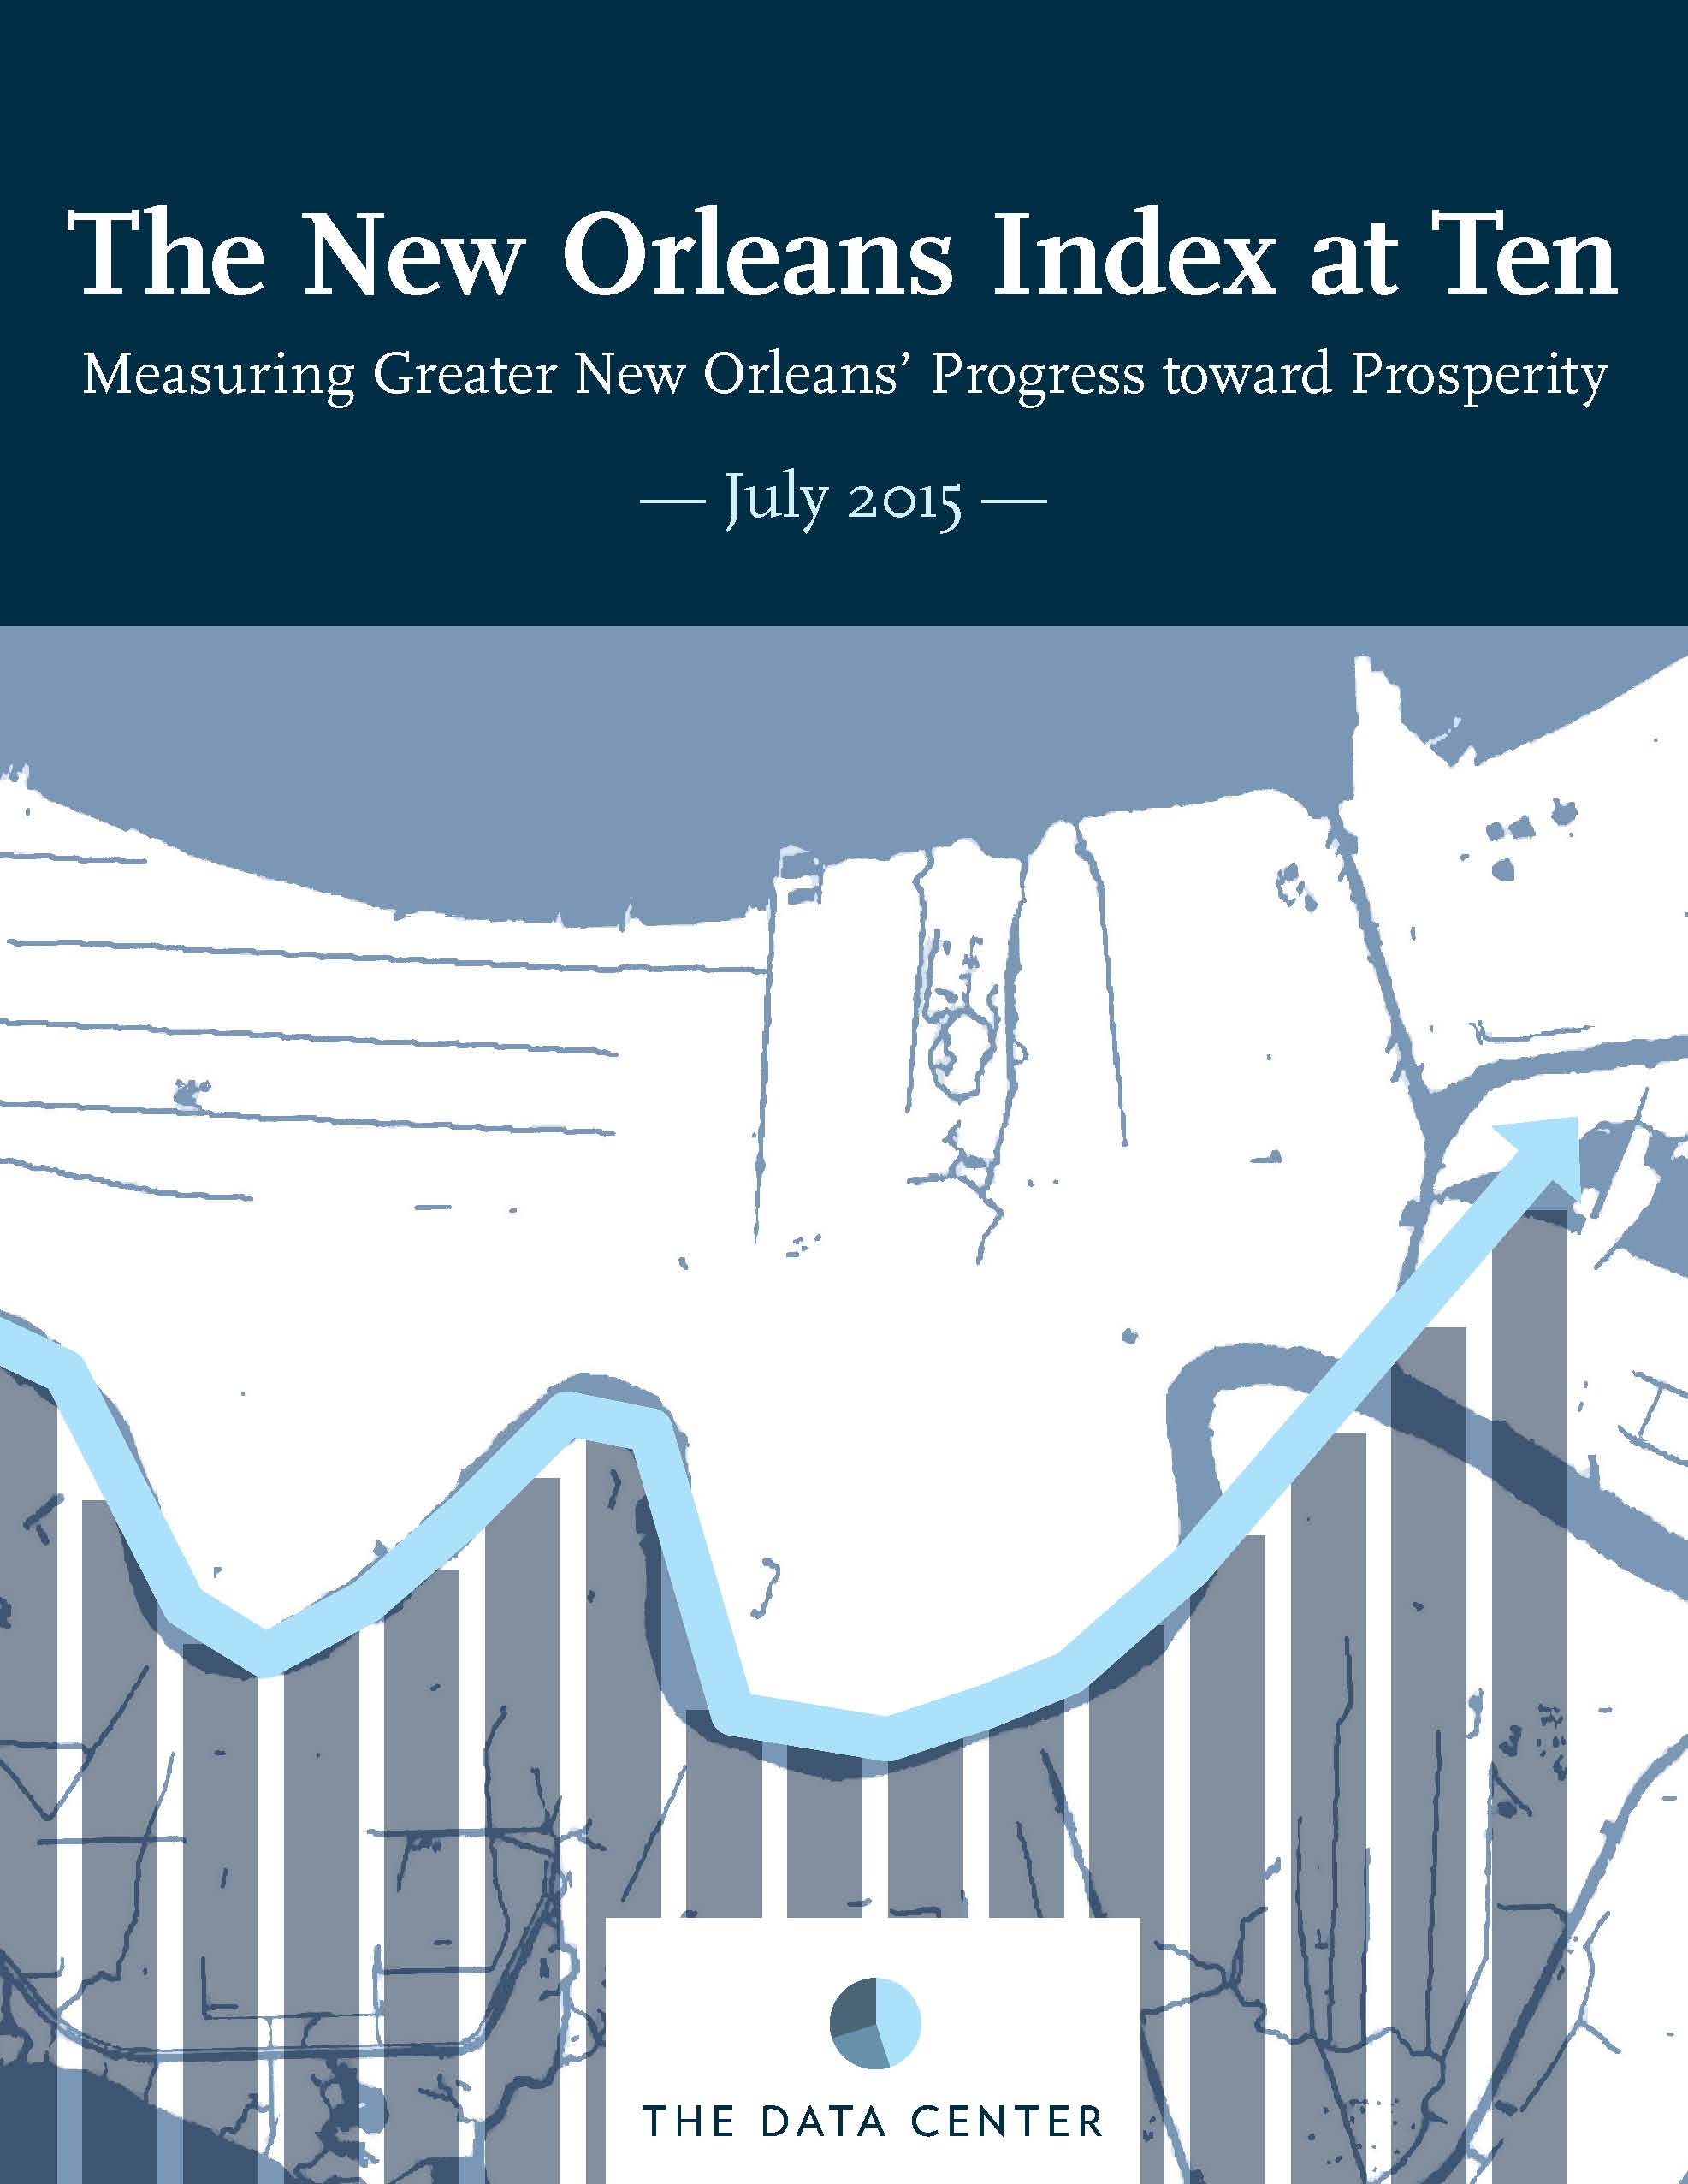 The New Orleans Index at Ten: Measuring Greater New Orleans’ Progress toward Prosperity